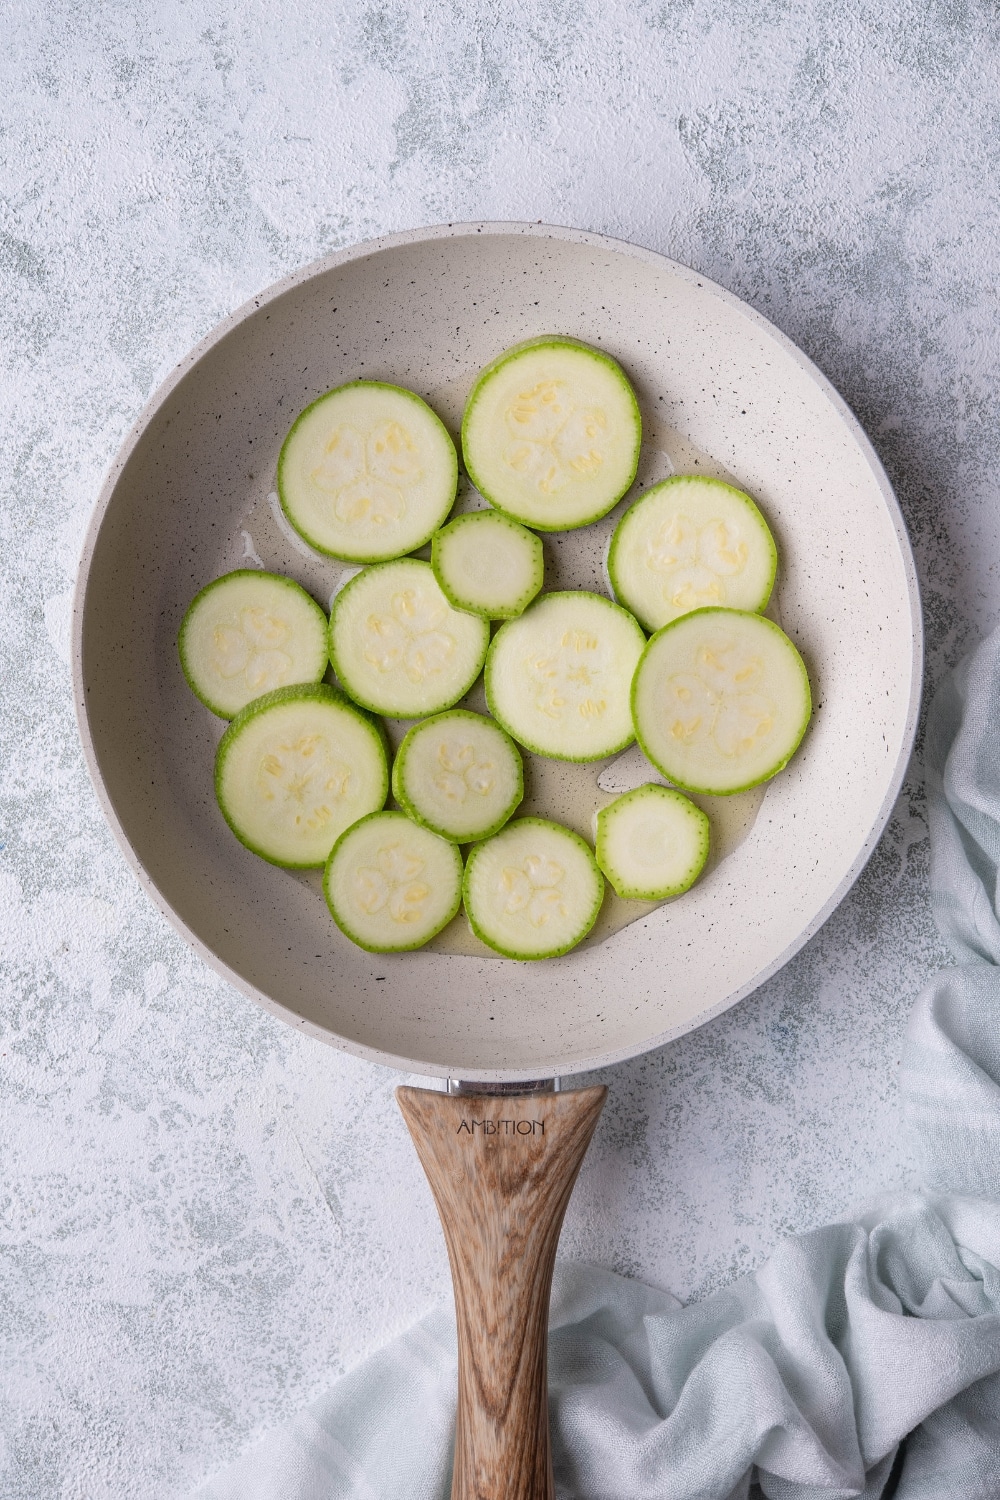 Raw zucchini slices with oil in a white speckled with a wooden handle. The pan is on a grey countertop and a tea towel is on the side.